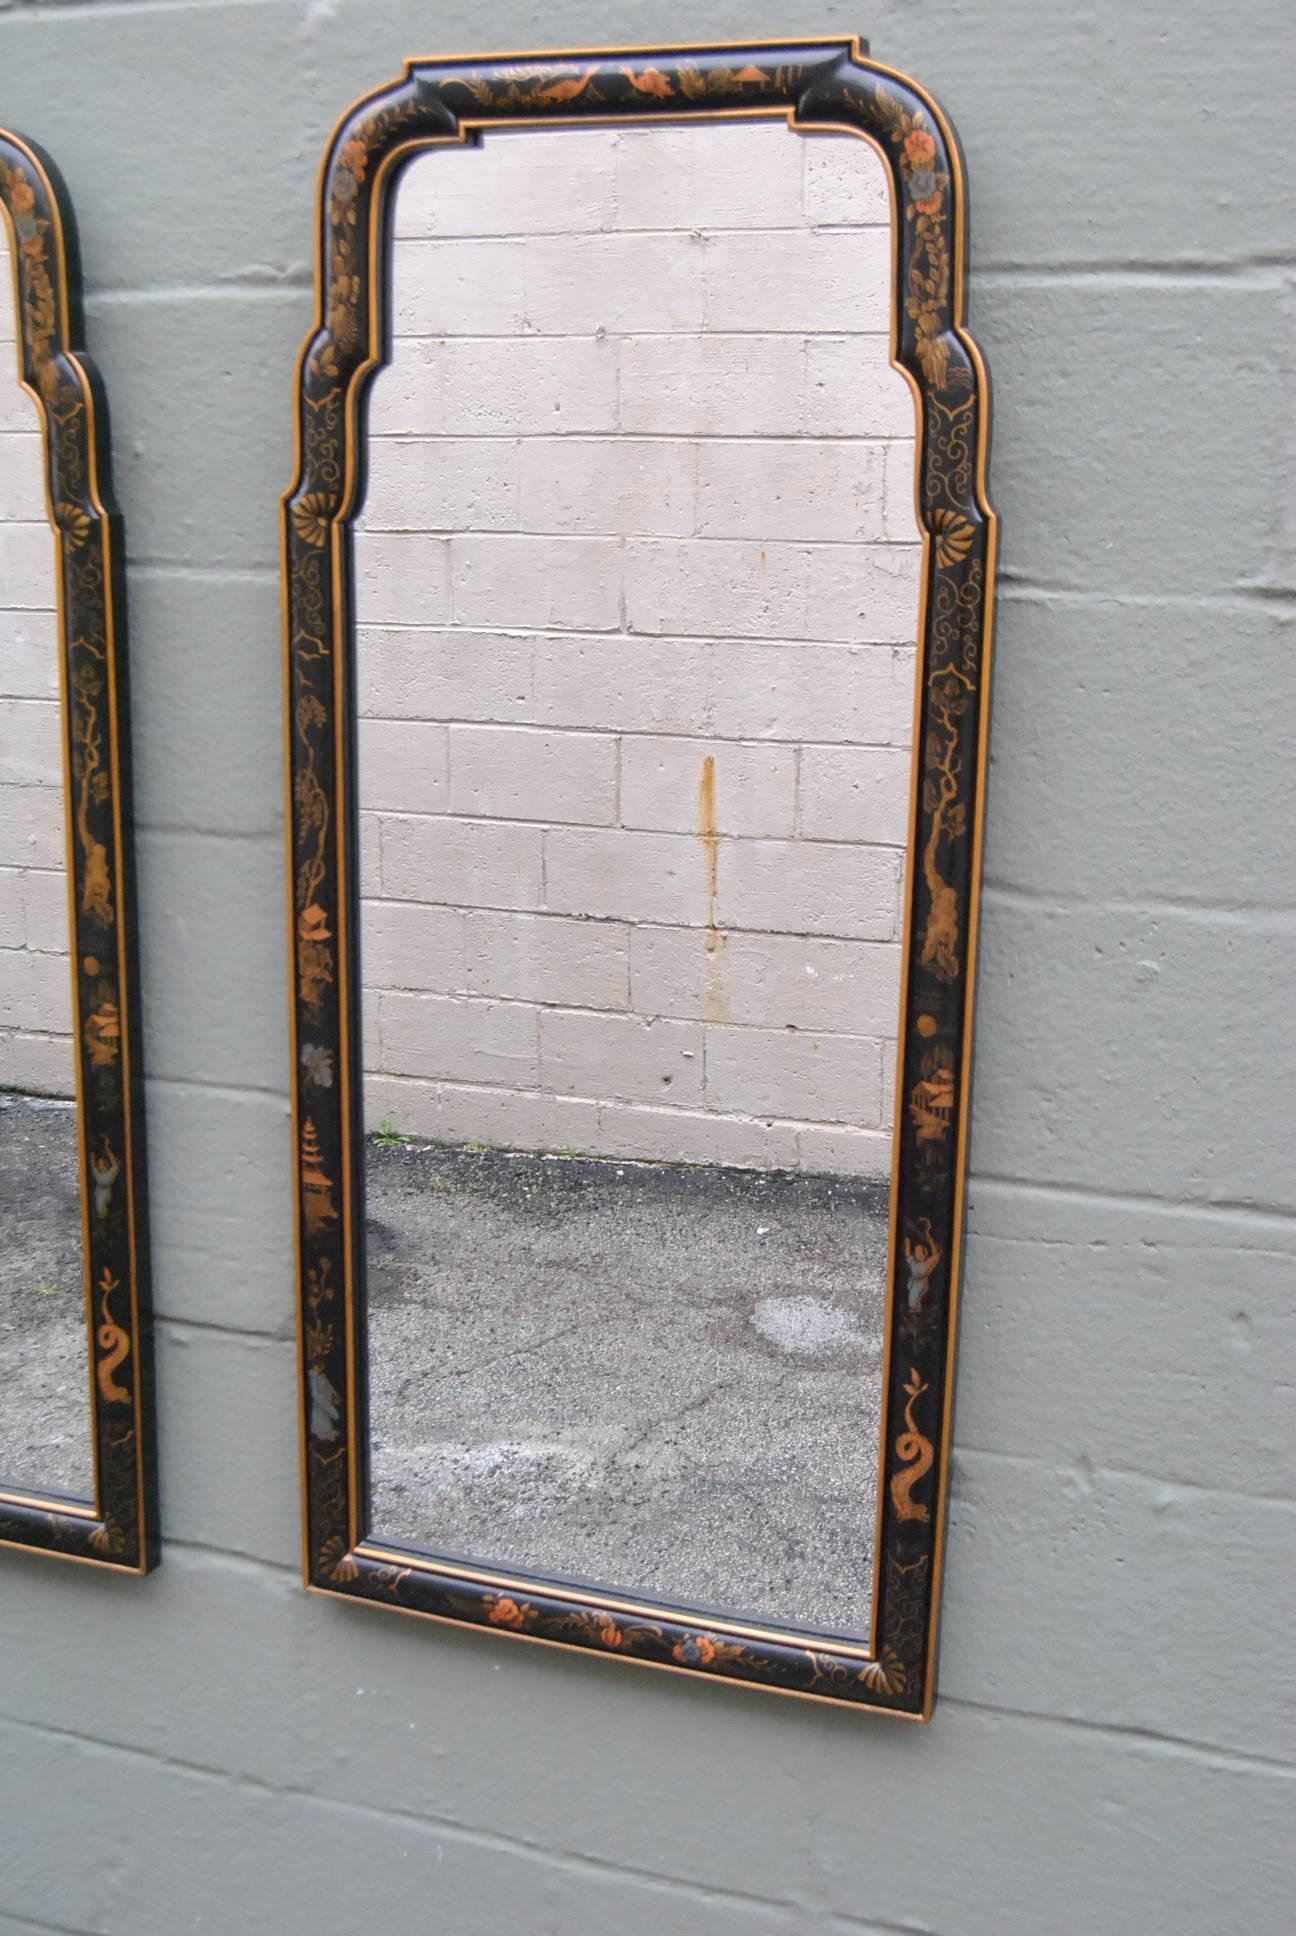 Beautiful pair of Drexel mirrors in black and gold. Asian Style chinoiserie with painted butterflies, trees, ducks and pagodas. Very nice+ pre owned condition. No silver loss.